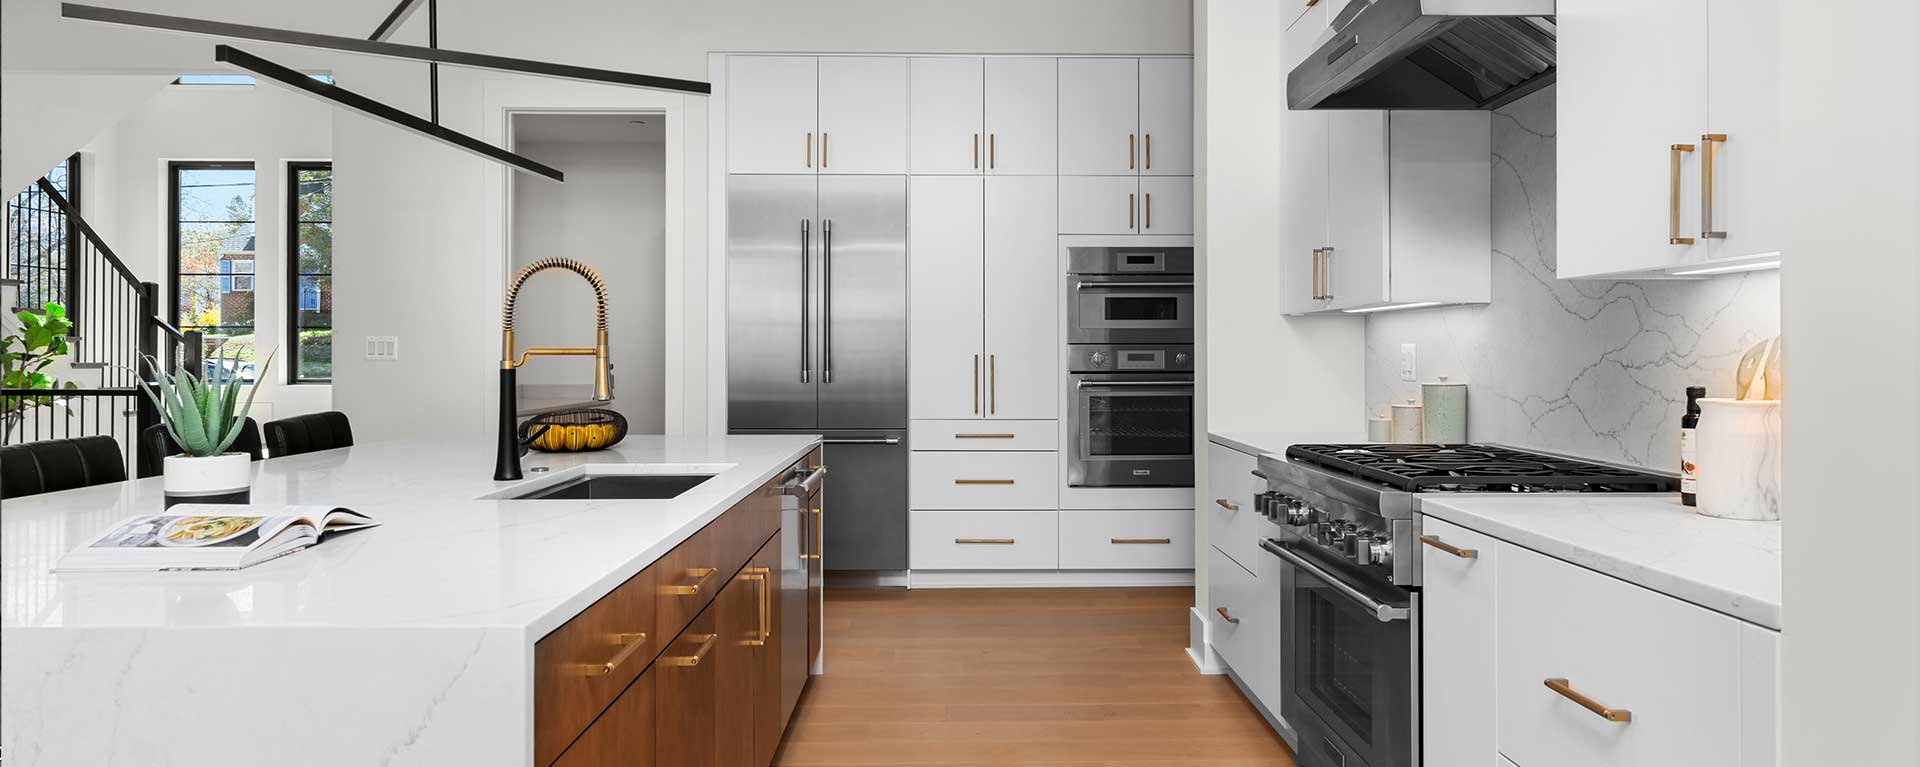 A contemporary Kitchen with custom white cabinets with gold hardware, white quartz waterfall island with stained cabinet underneath, gourmet range, built-in appliances and quartz backsplash.